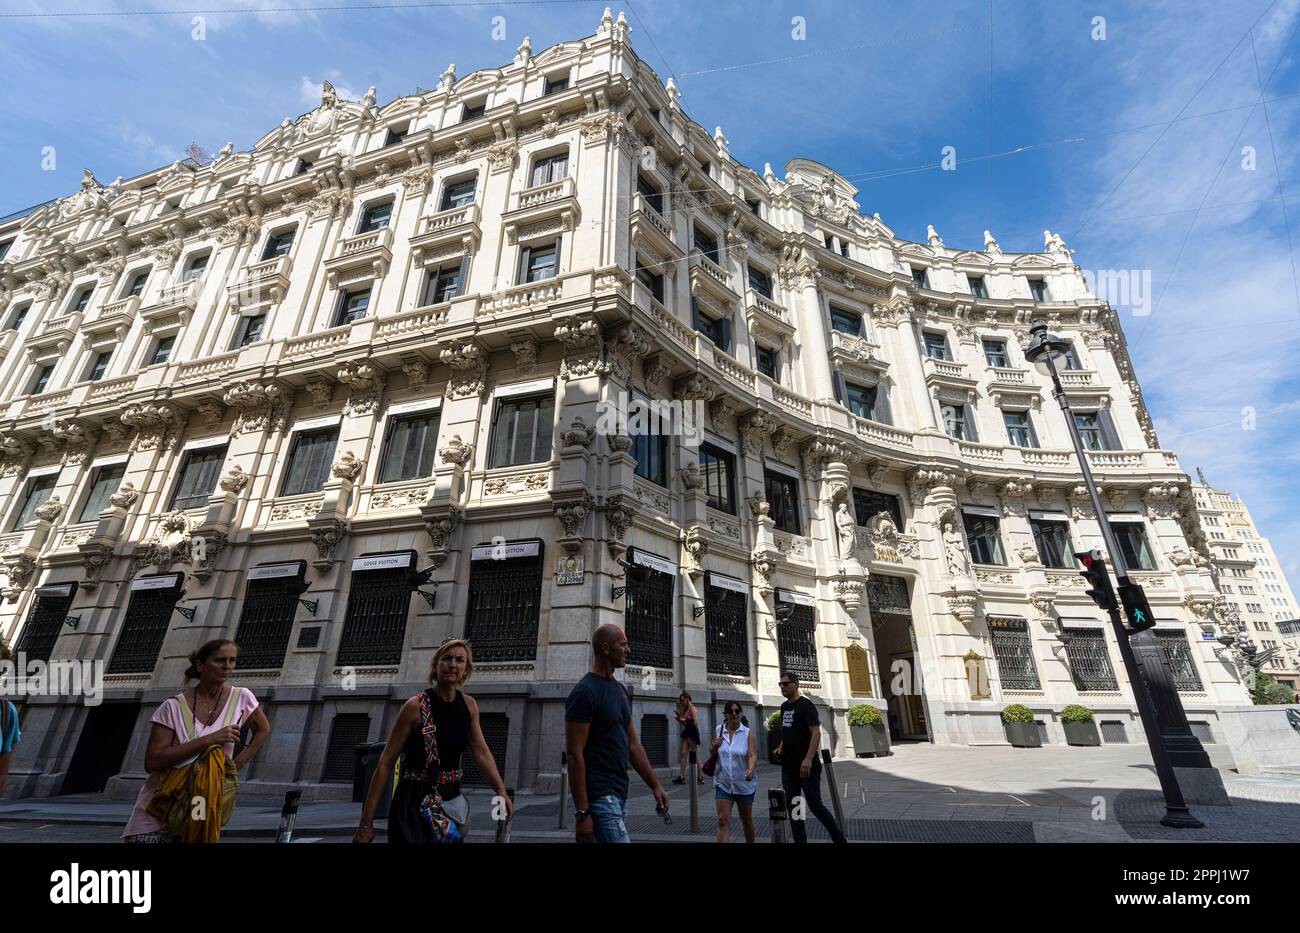 Canalejas, galleria commerciale a Madrid, Spagna Foto Stock